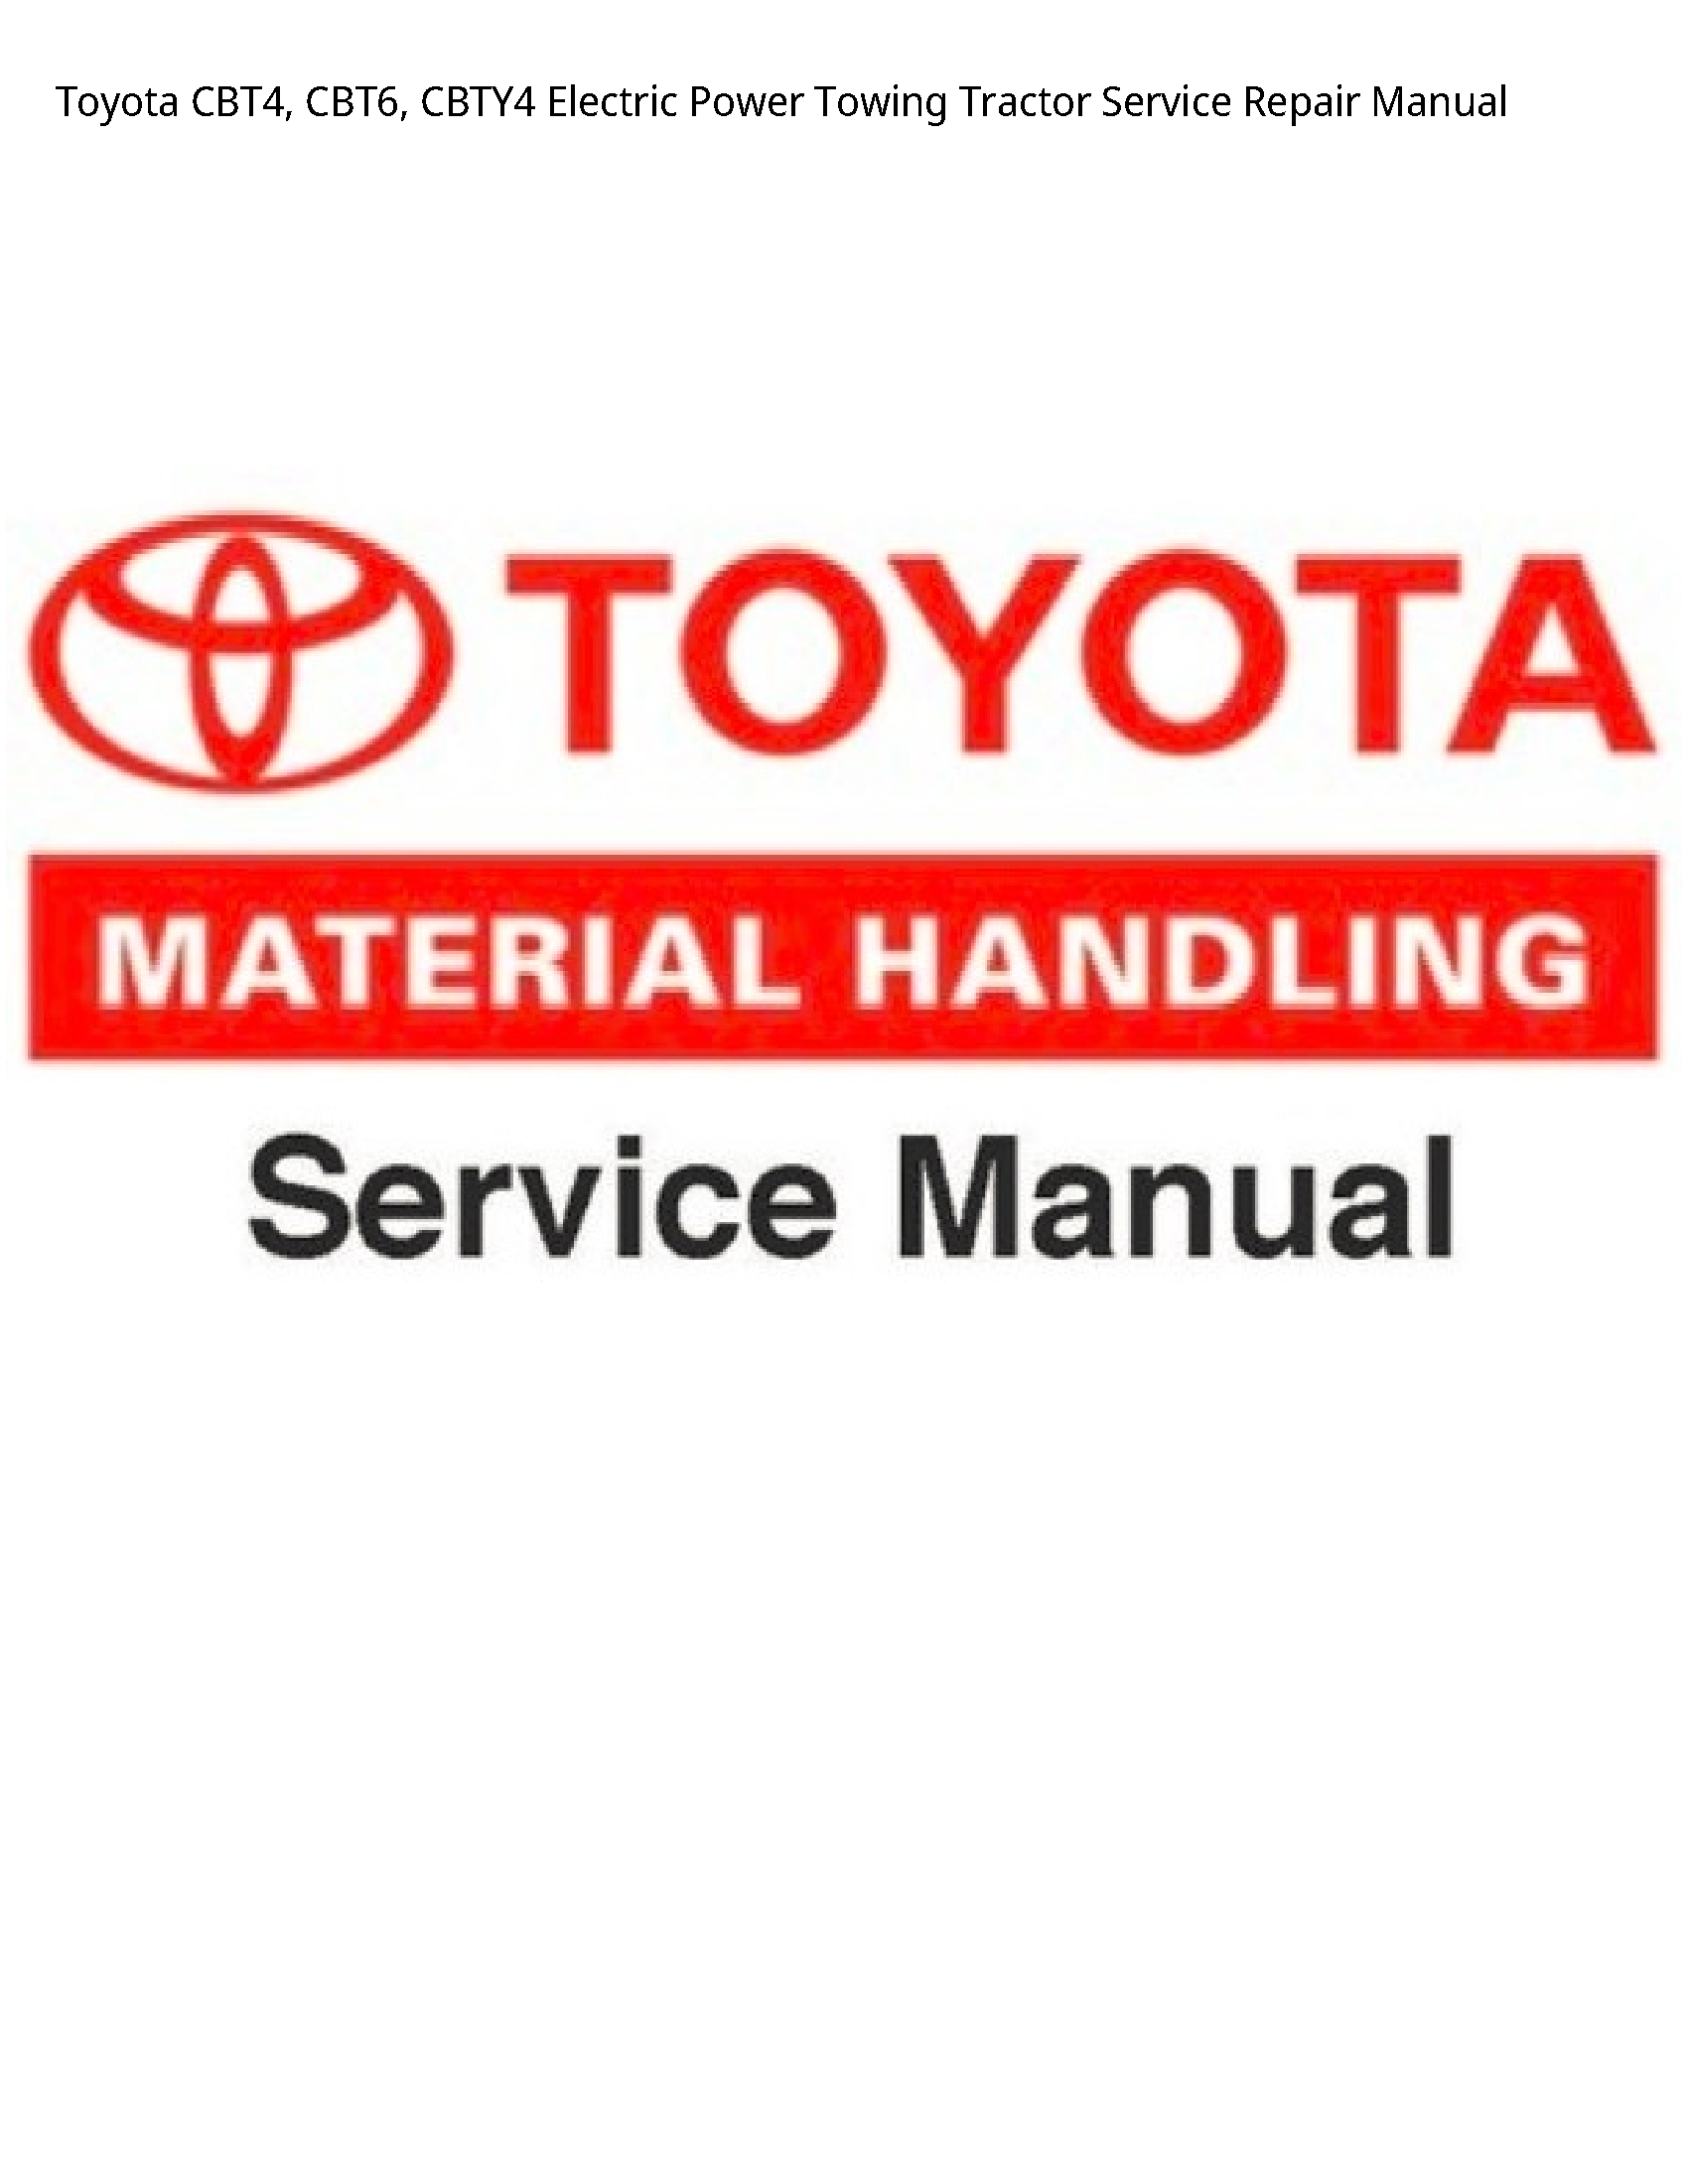 Toyota CBT4 Electric Power Towing Tractor manual